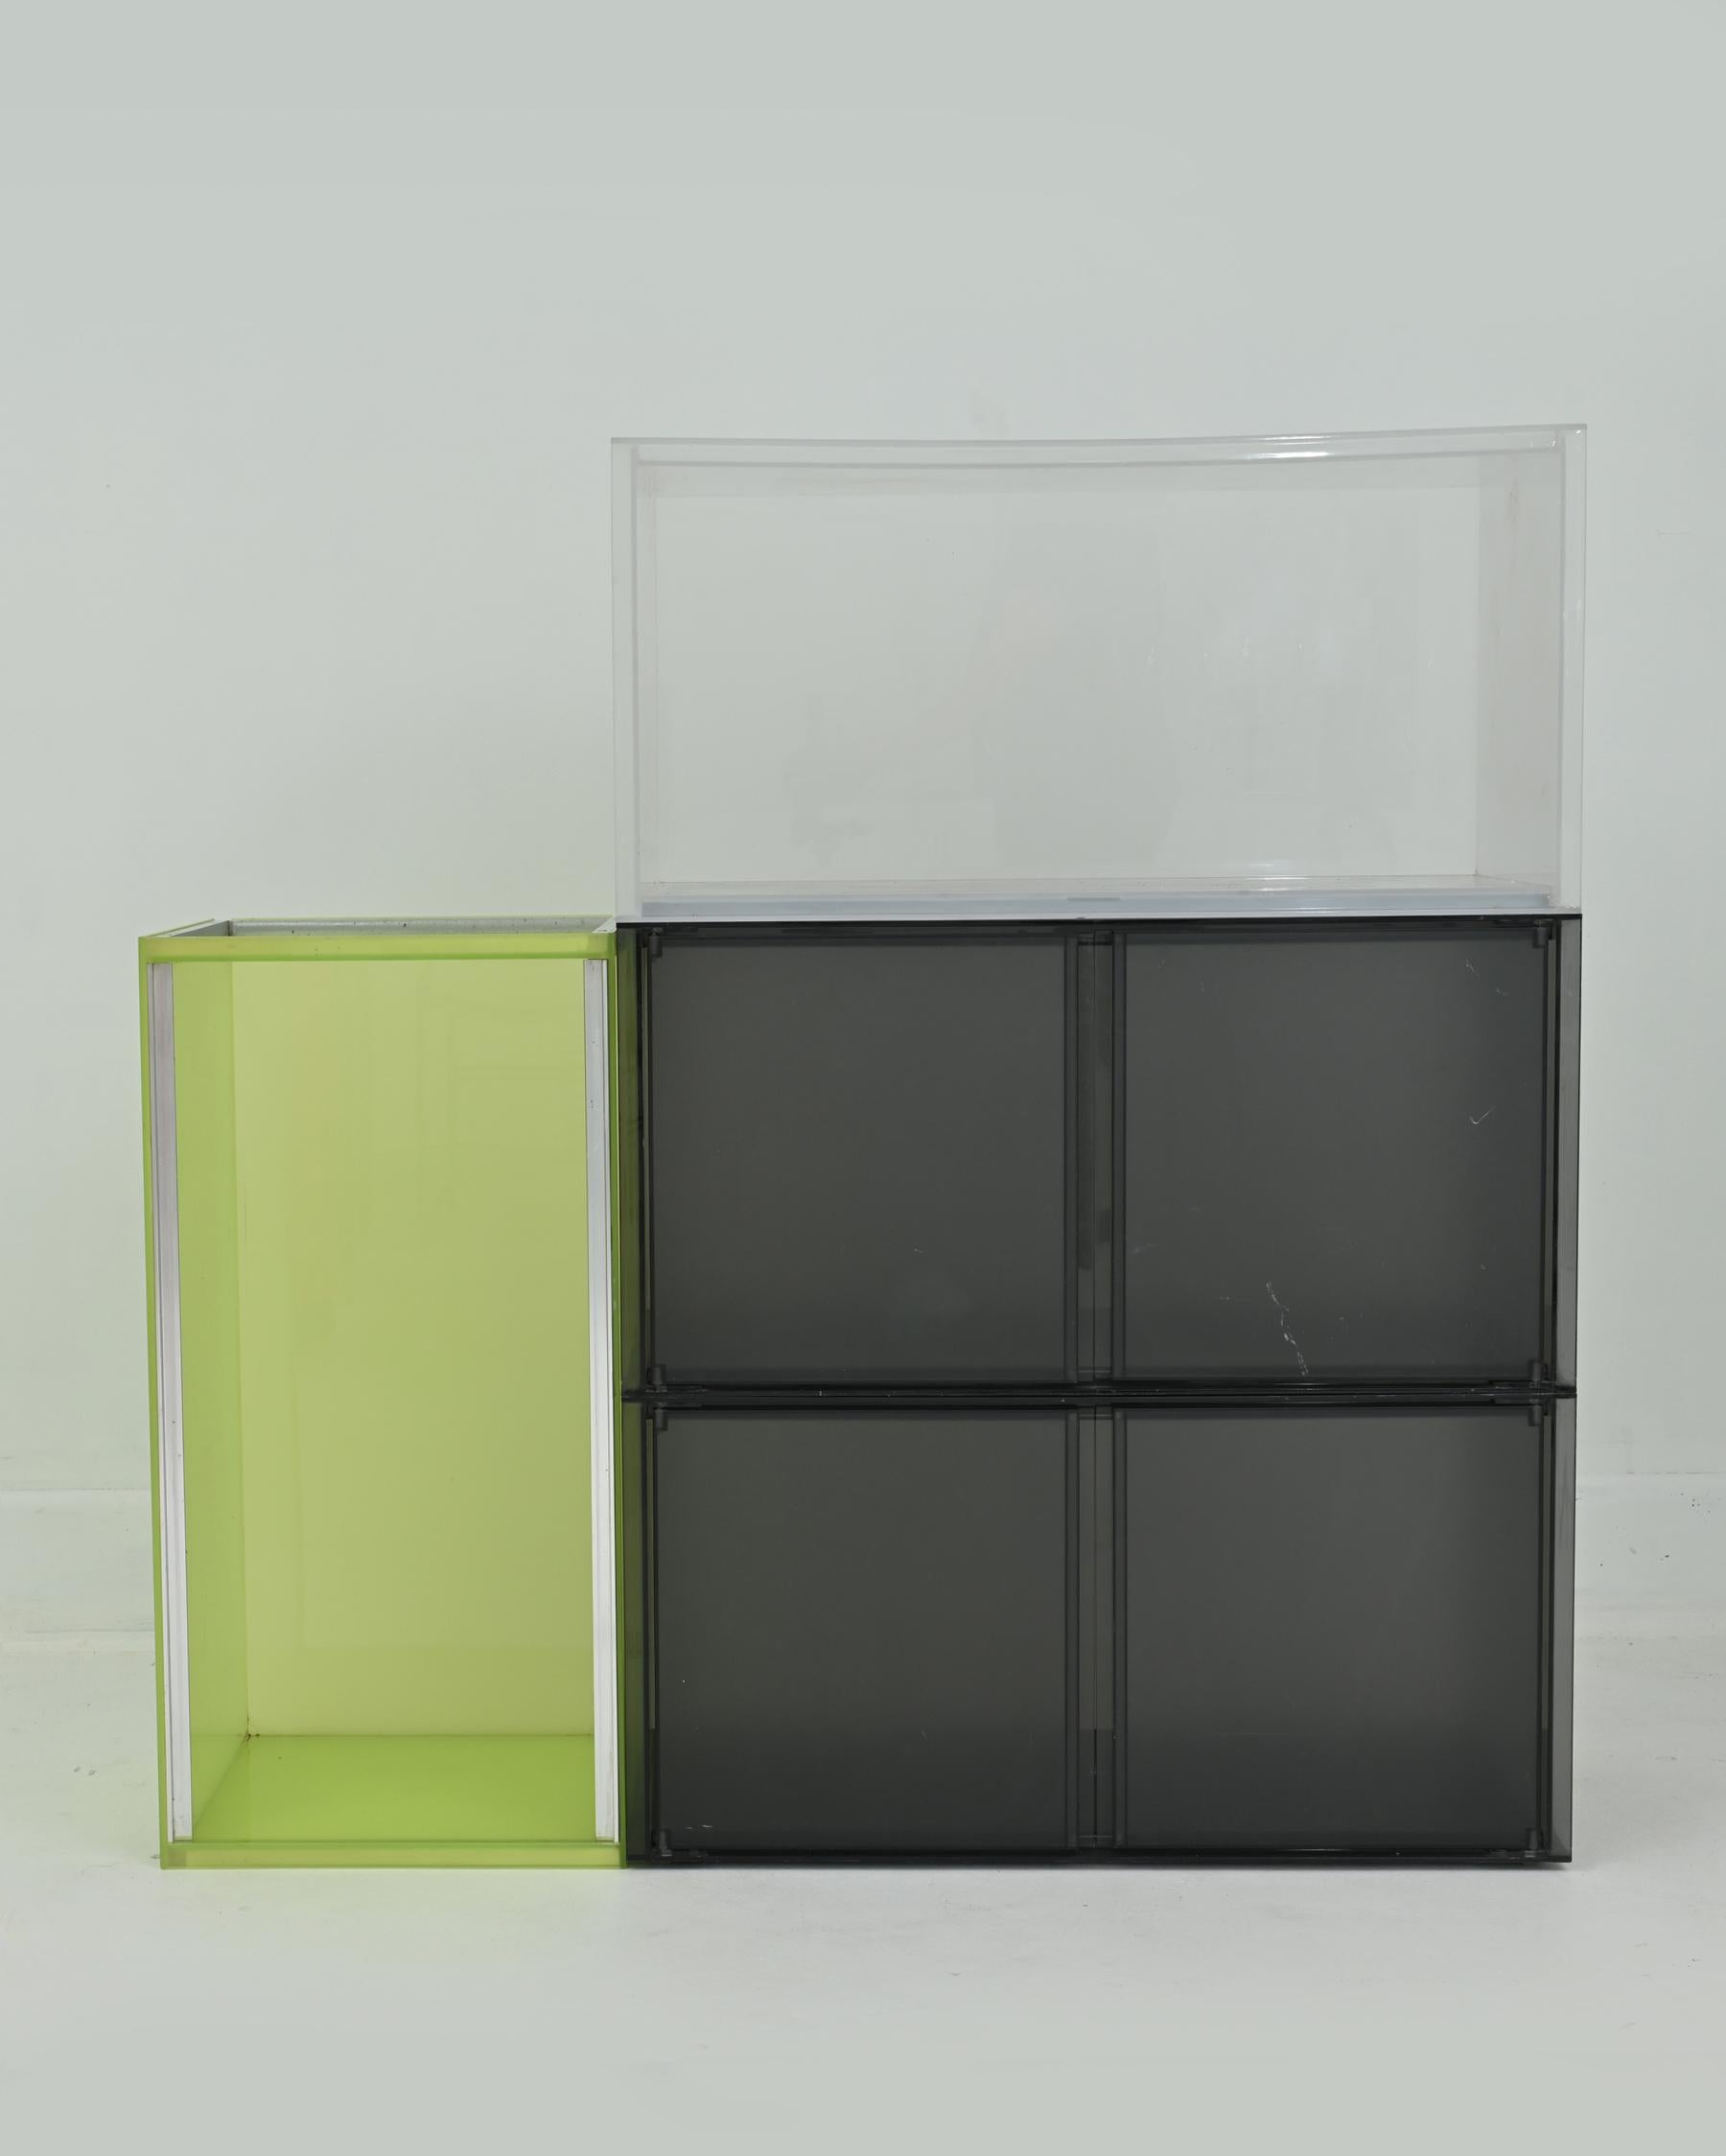 1990s Acrylic Resin and Steel “One” Wall Unit by Piero Lissoni for Kartell For Sale 3